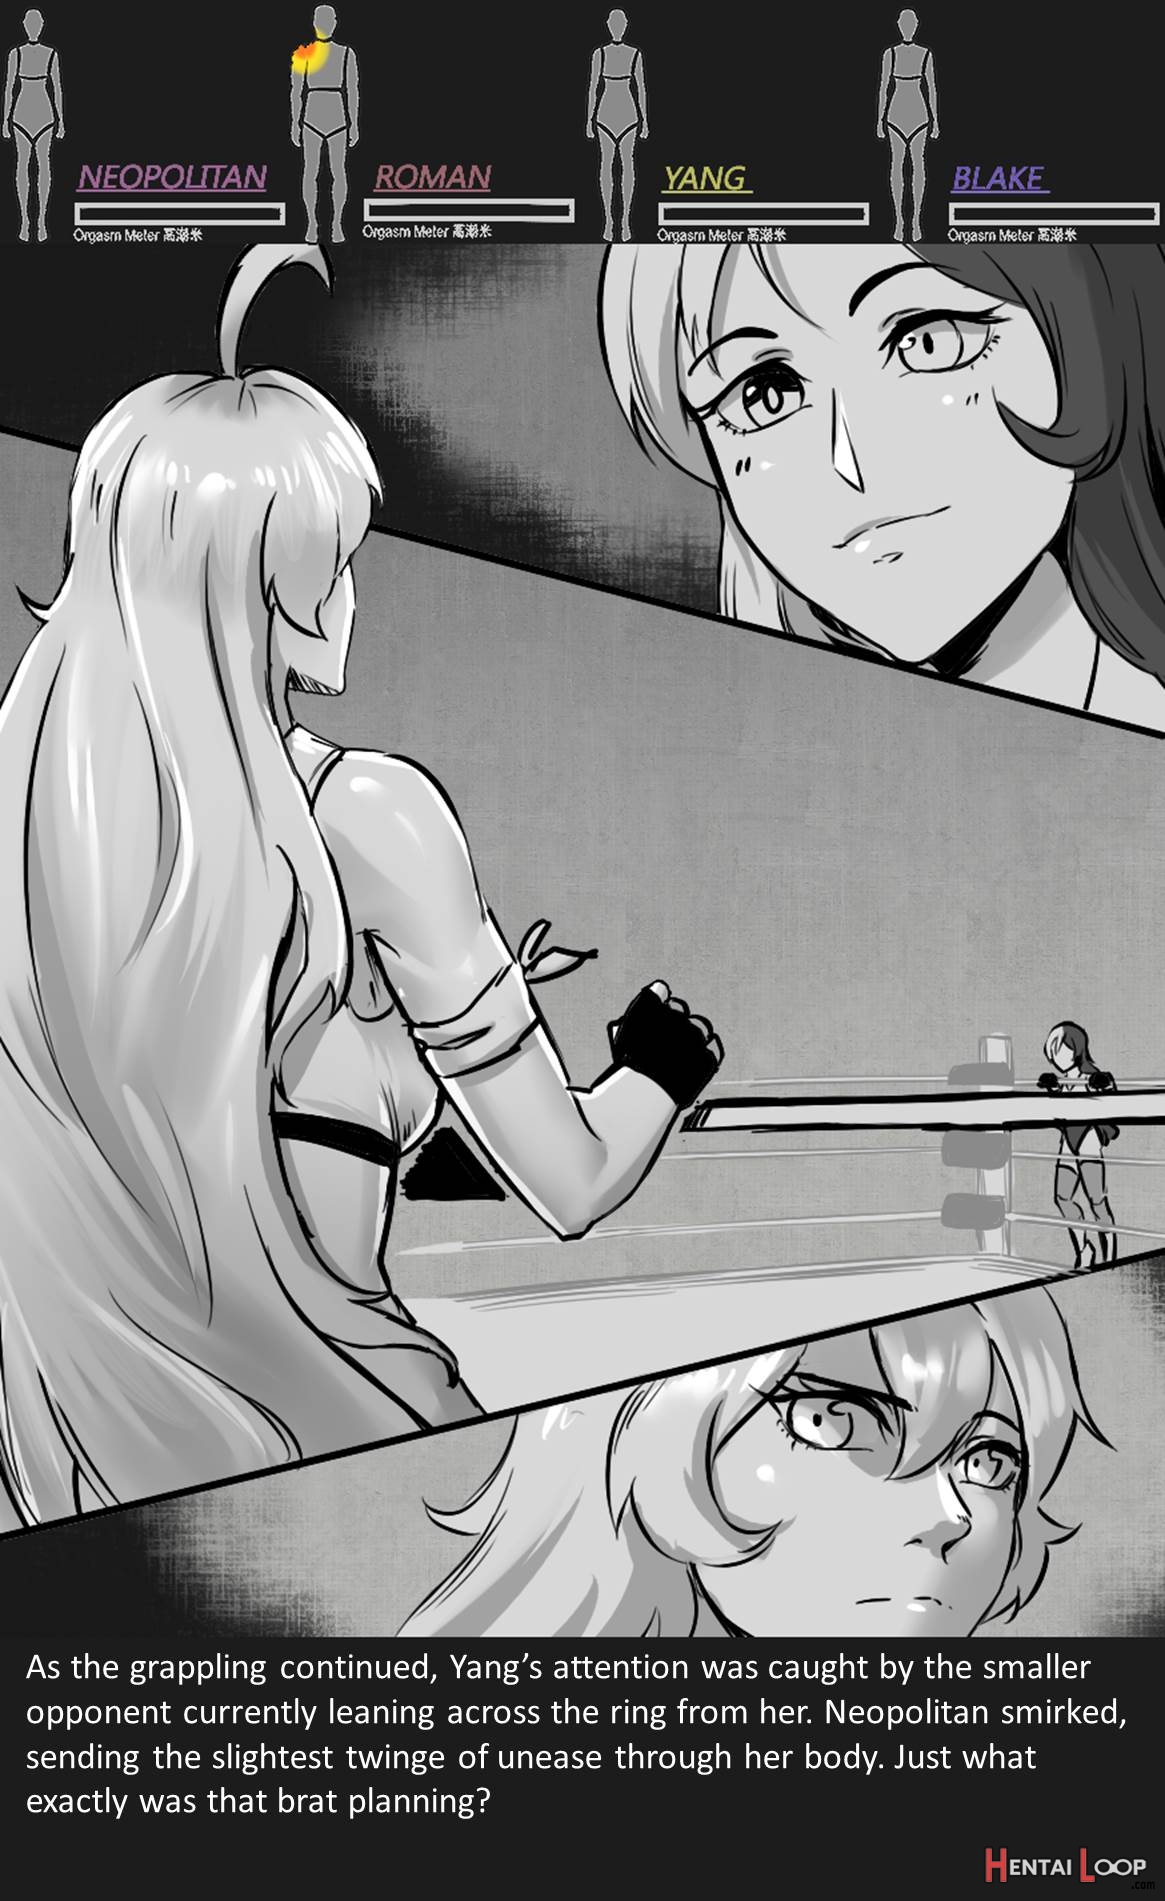 Remnant Rumble- Bumblebee Vs Gelato Full page 7